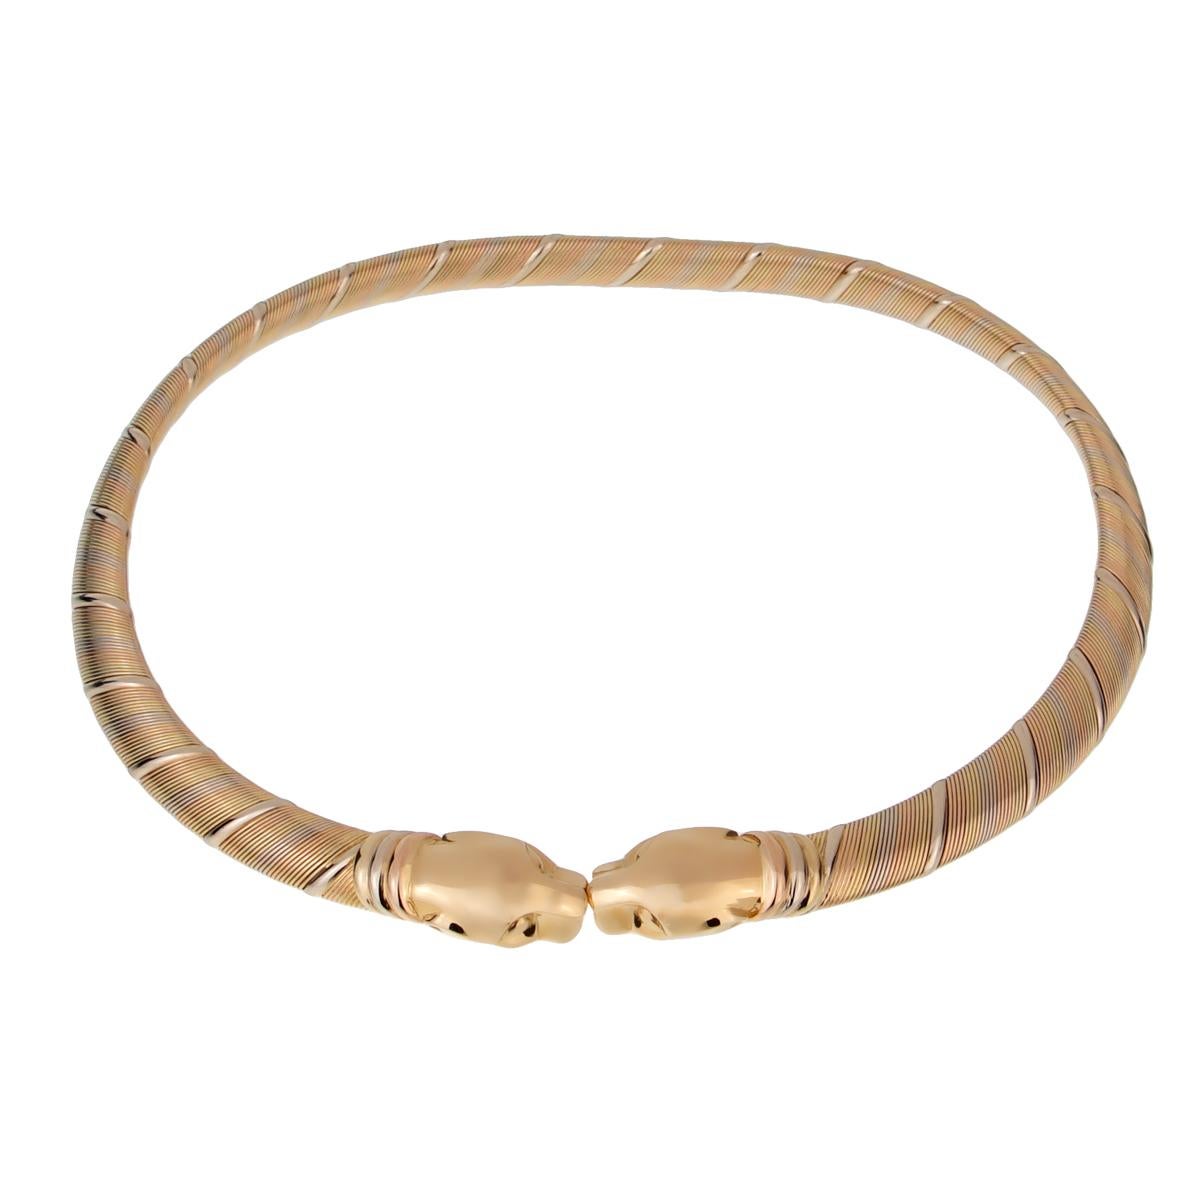 Cartier Vintage Panthere 18k Tri Color Gold Choker Necklace In Excellent Condition For Sale In Feasterville, PA